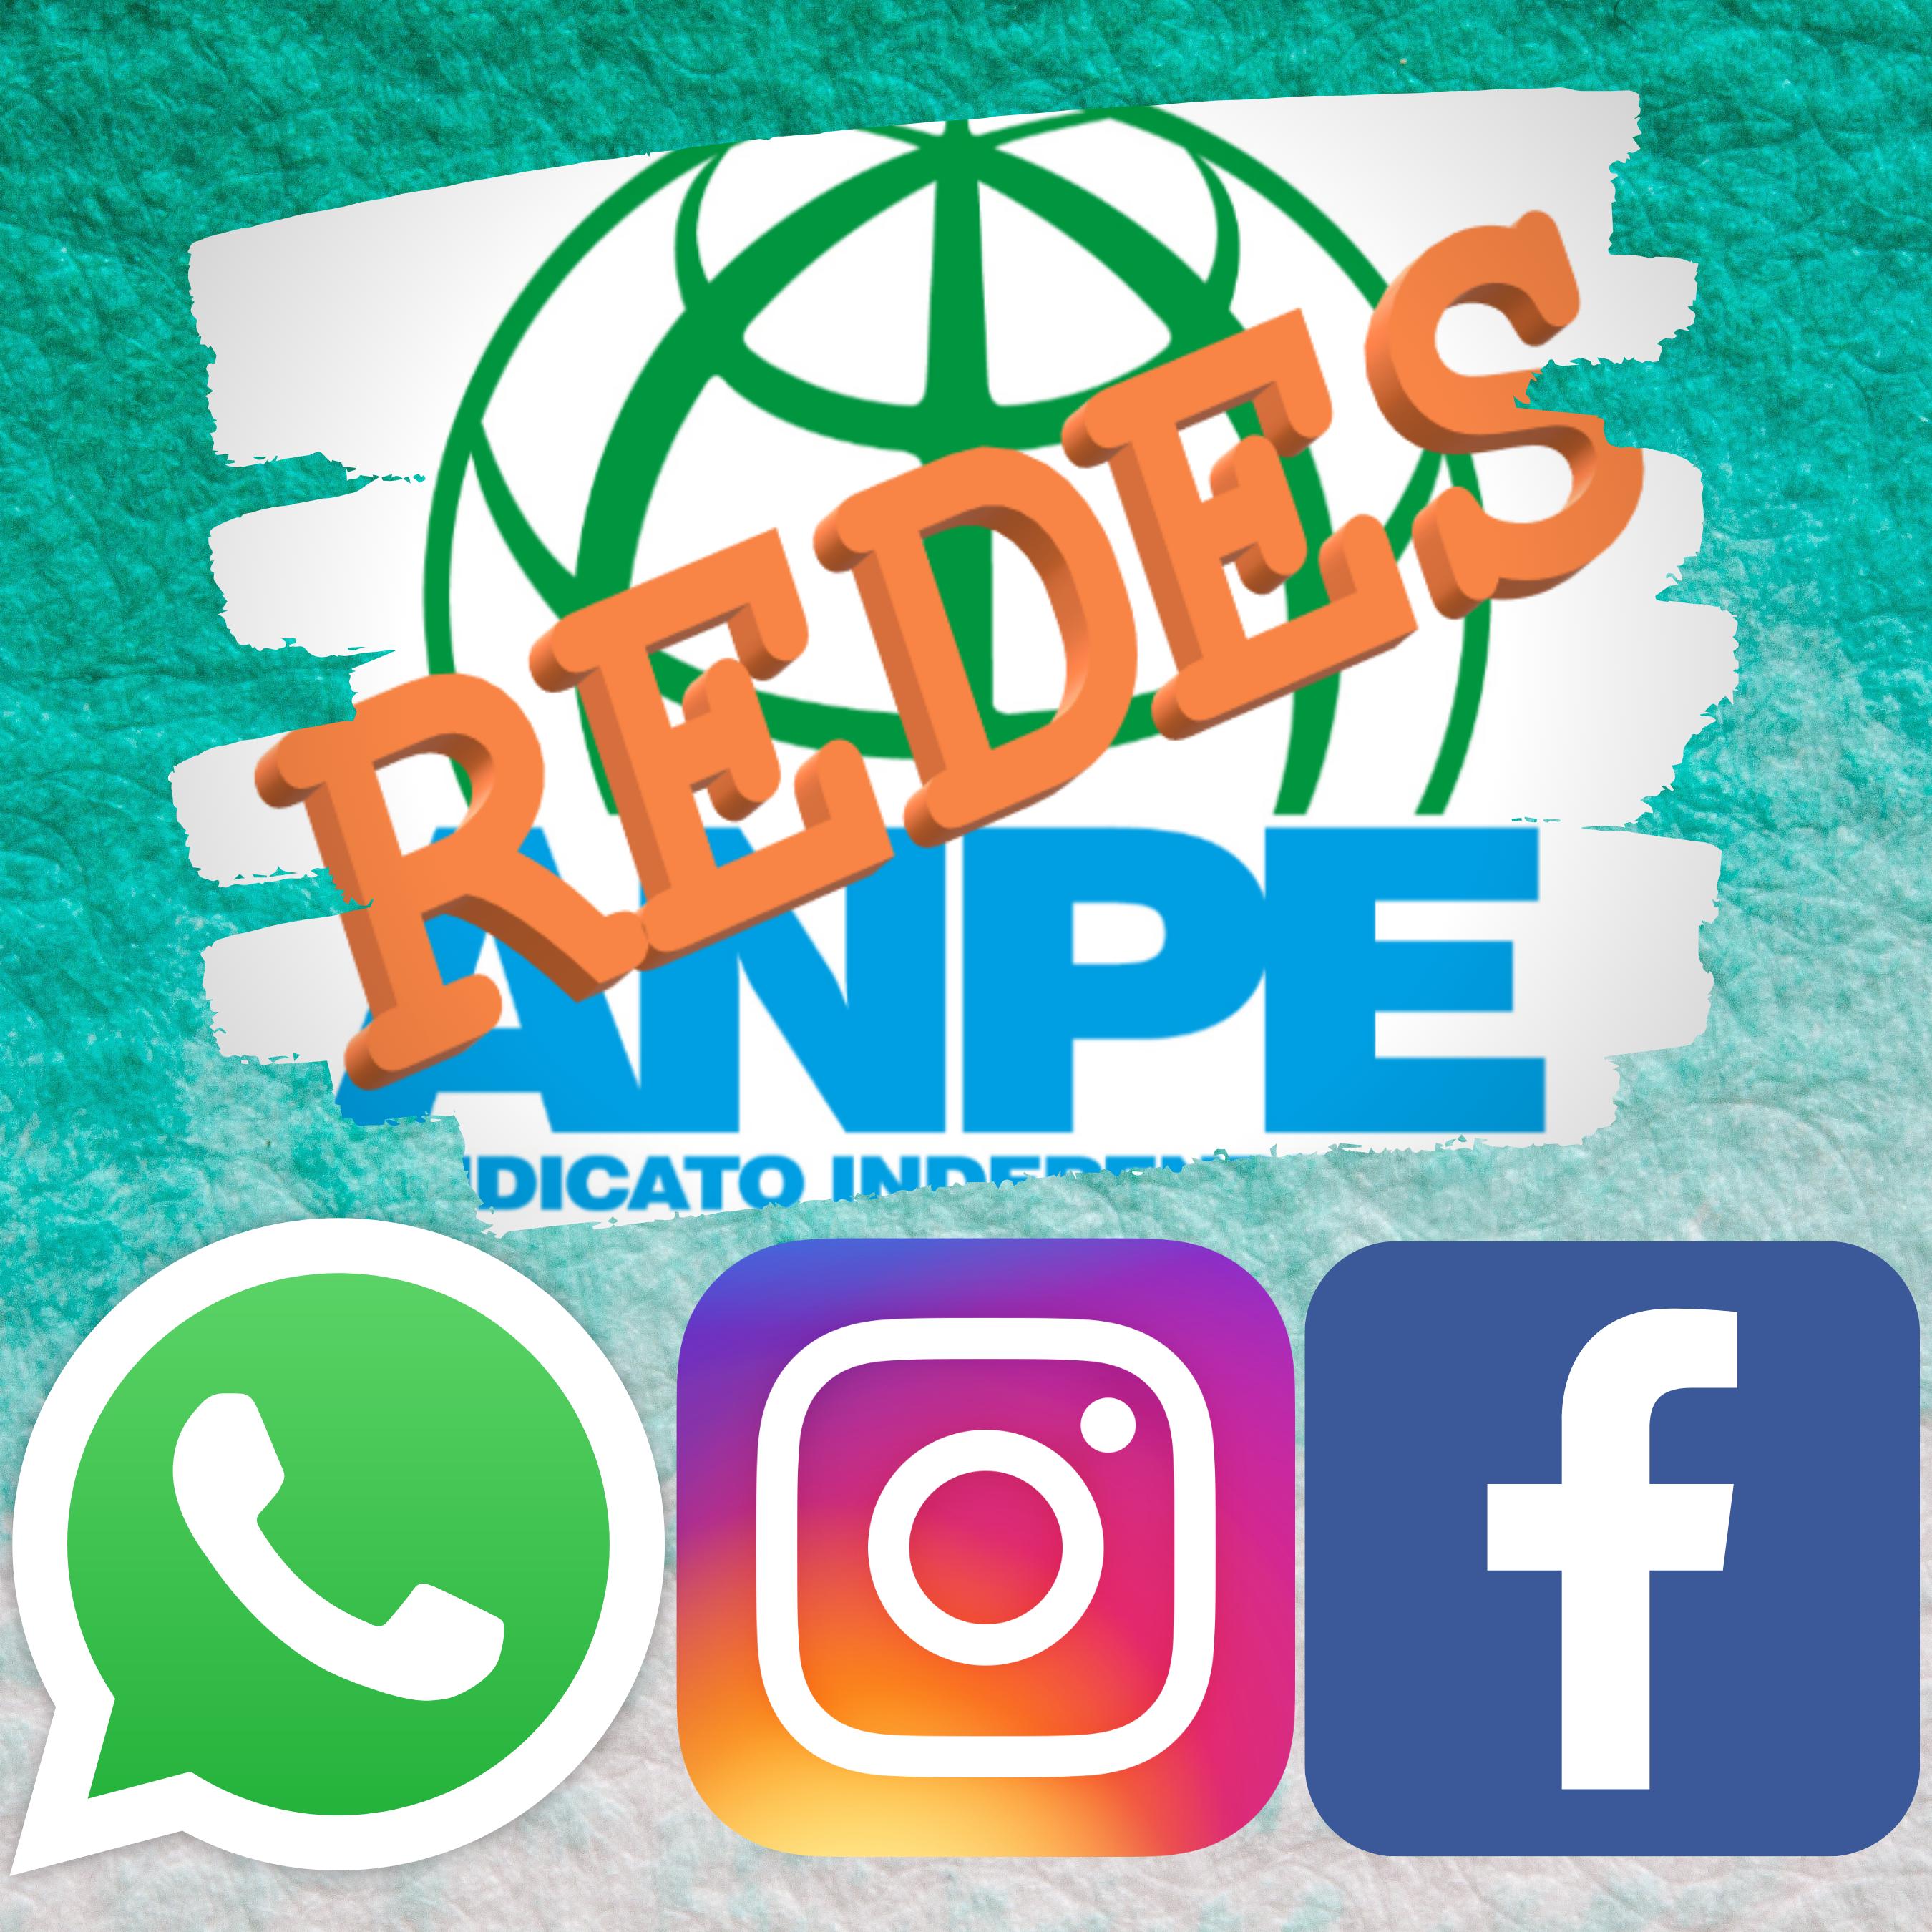 anpe-redes-wh-ig-fb